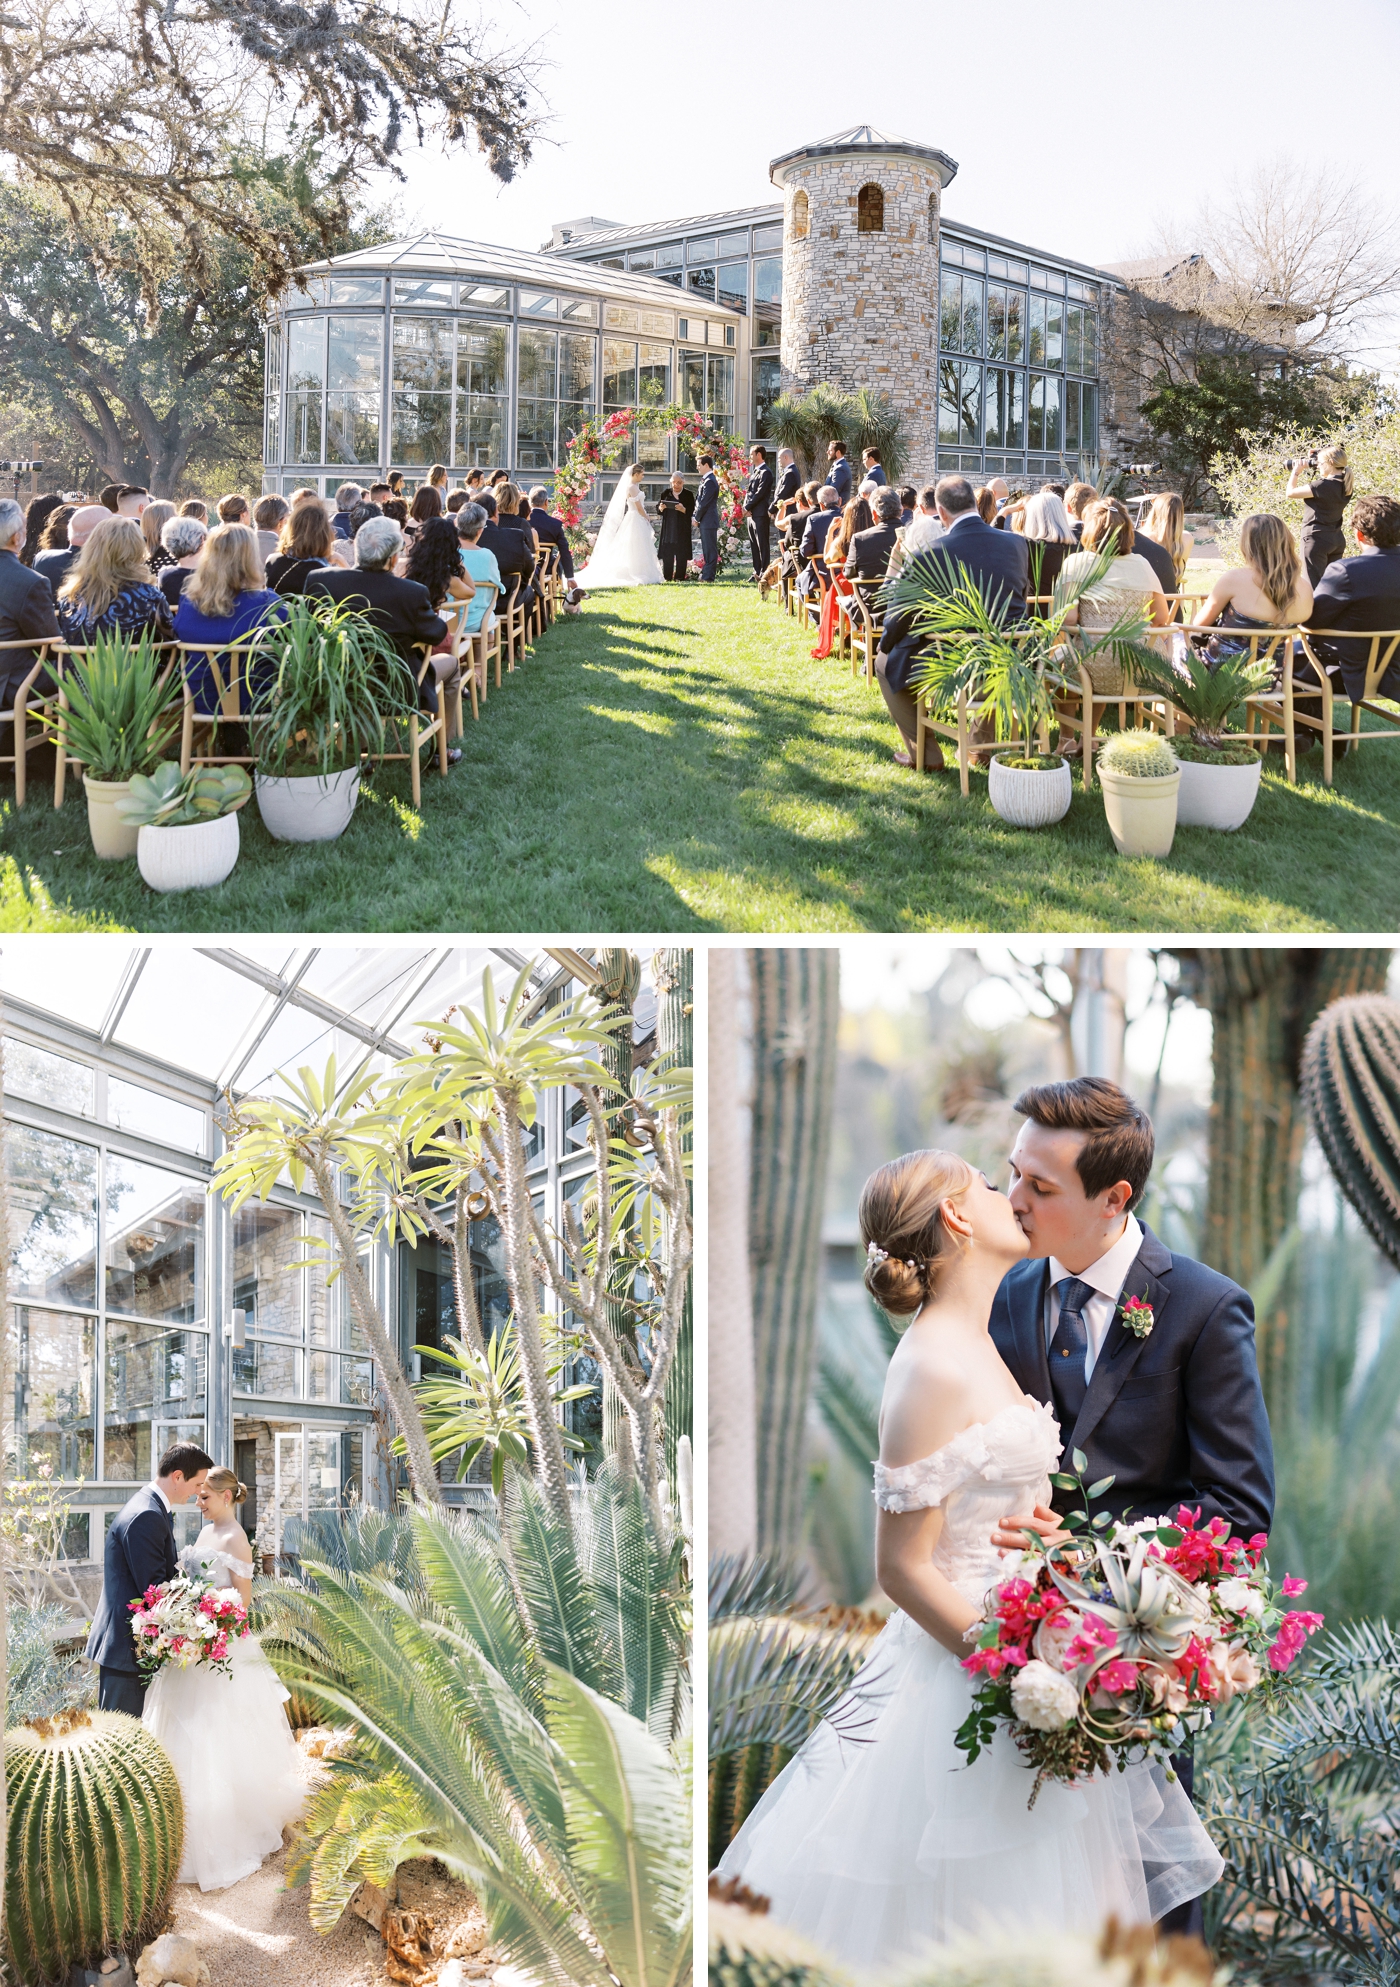 Outdoor wedding ceremony at The Greenhouse at Driftwood in Texas